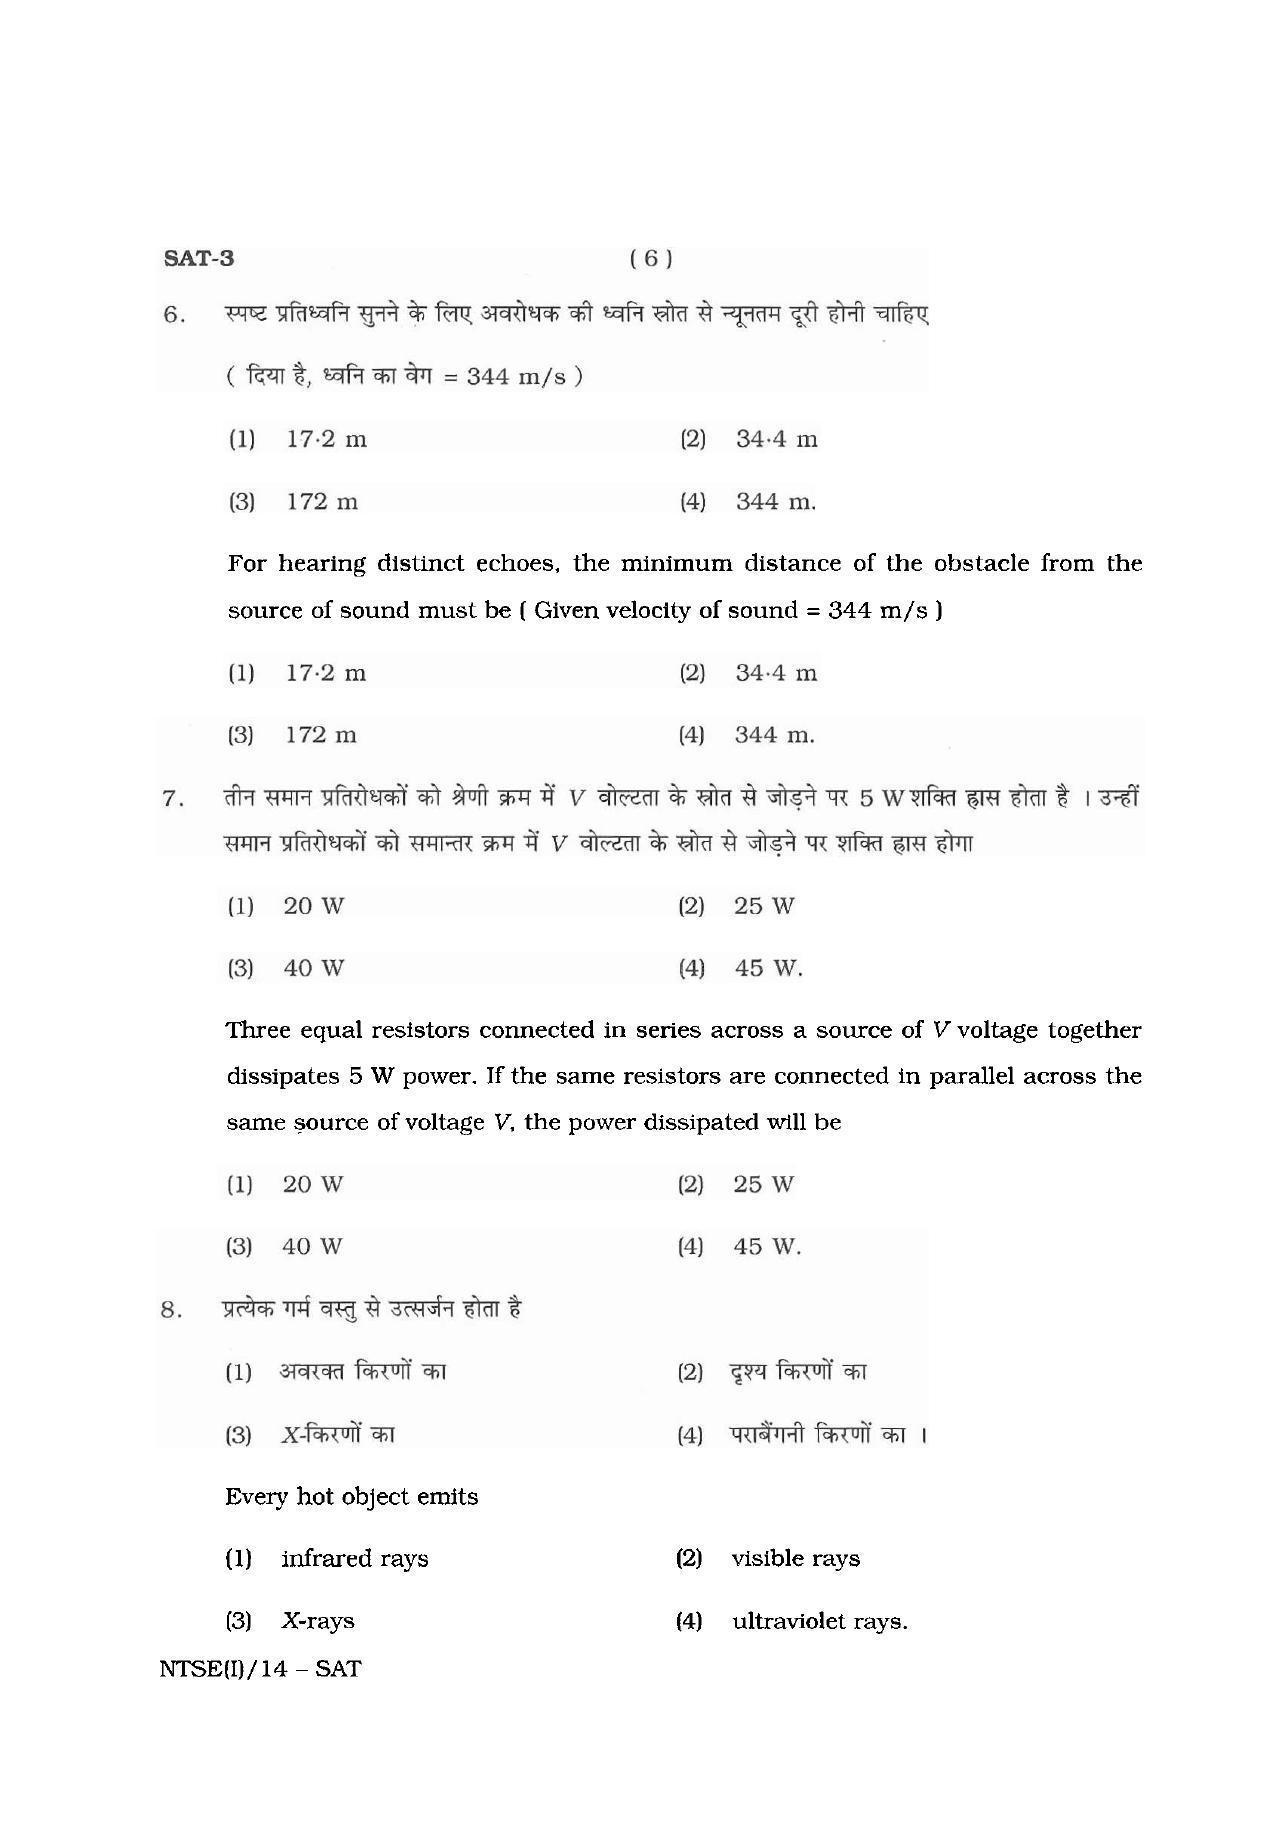 NTSE 2014 (Stage II) SAT Question Paper - Page 6